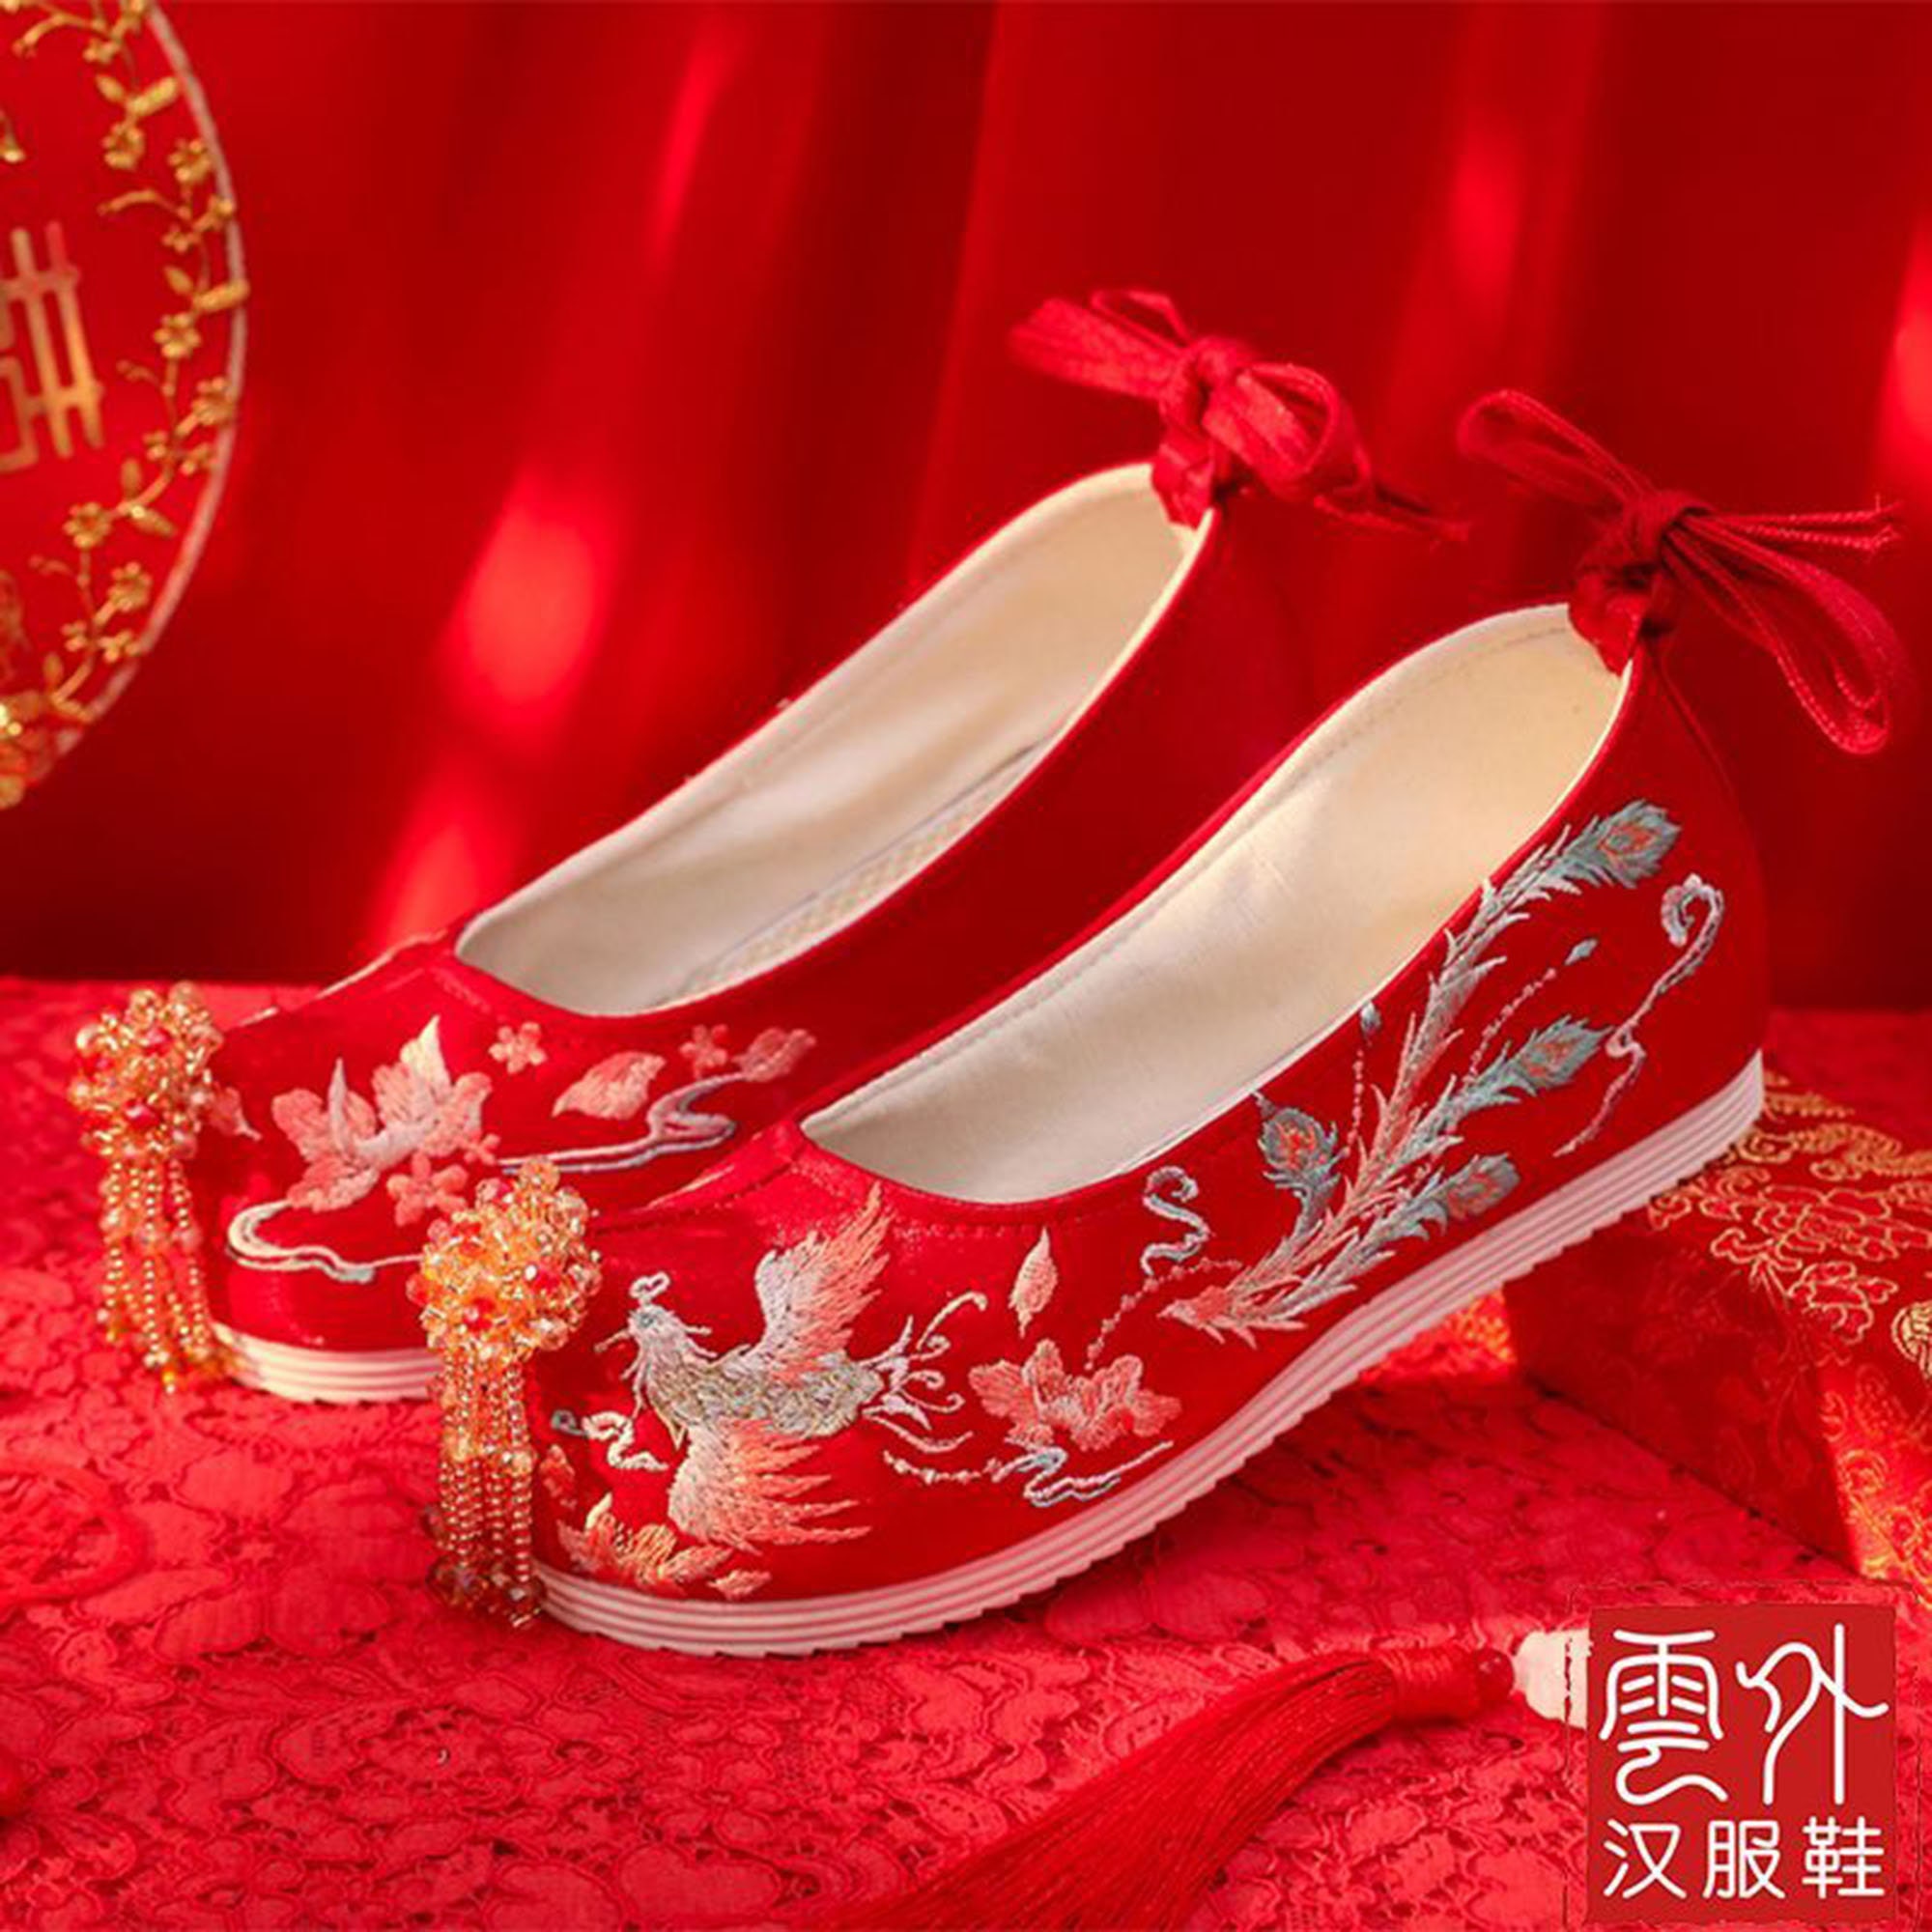 Buy Asian, Cheongsam Flat, Flip Flop Sandals or Slippers With Rubber Sole,  Covered With Red/gold Satiny Fabric Eur 39/40 / USA 8/9 / UK 6/7 Online in  India - Etsy